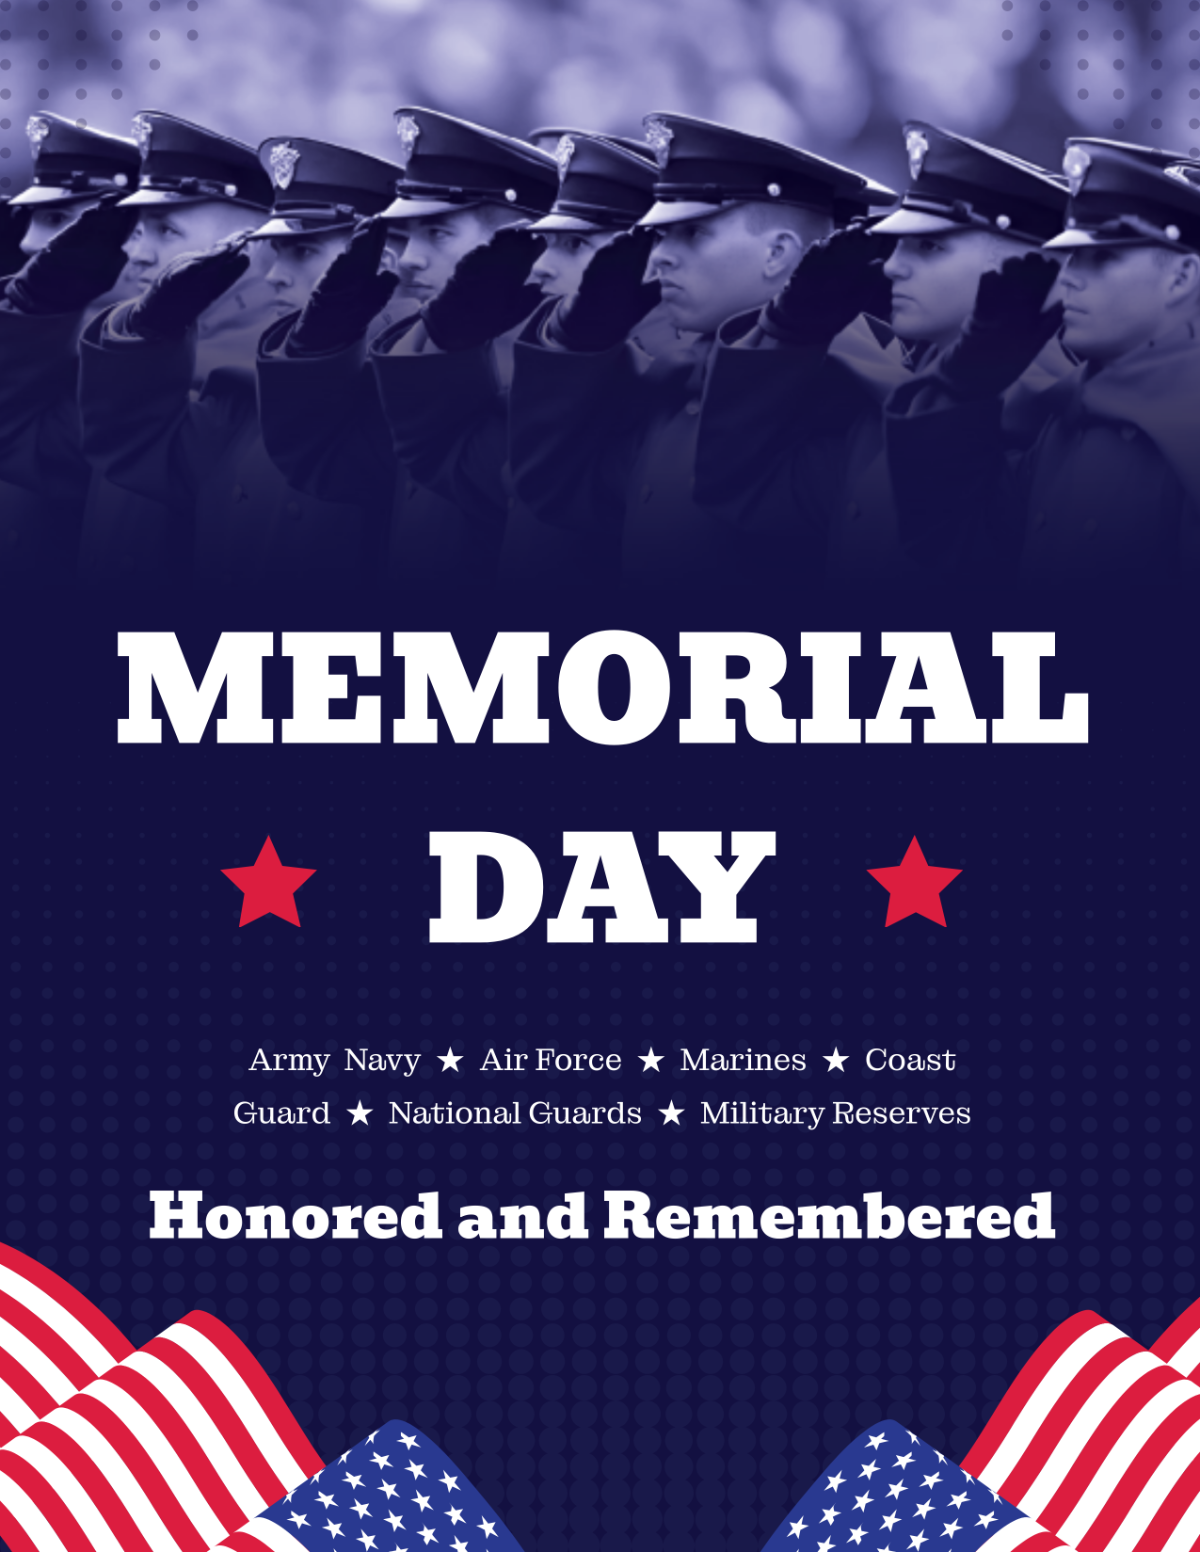 Blue Memorial Day Flyer Template